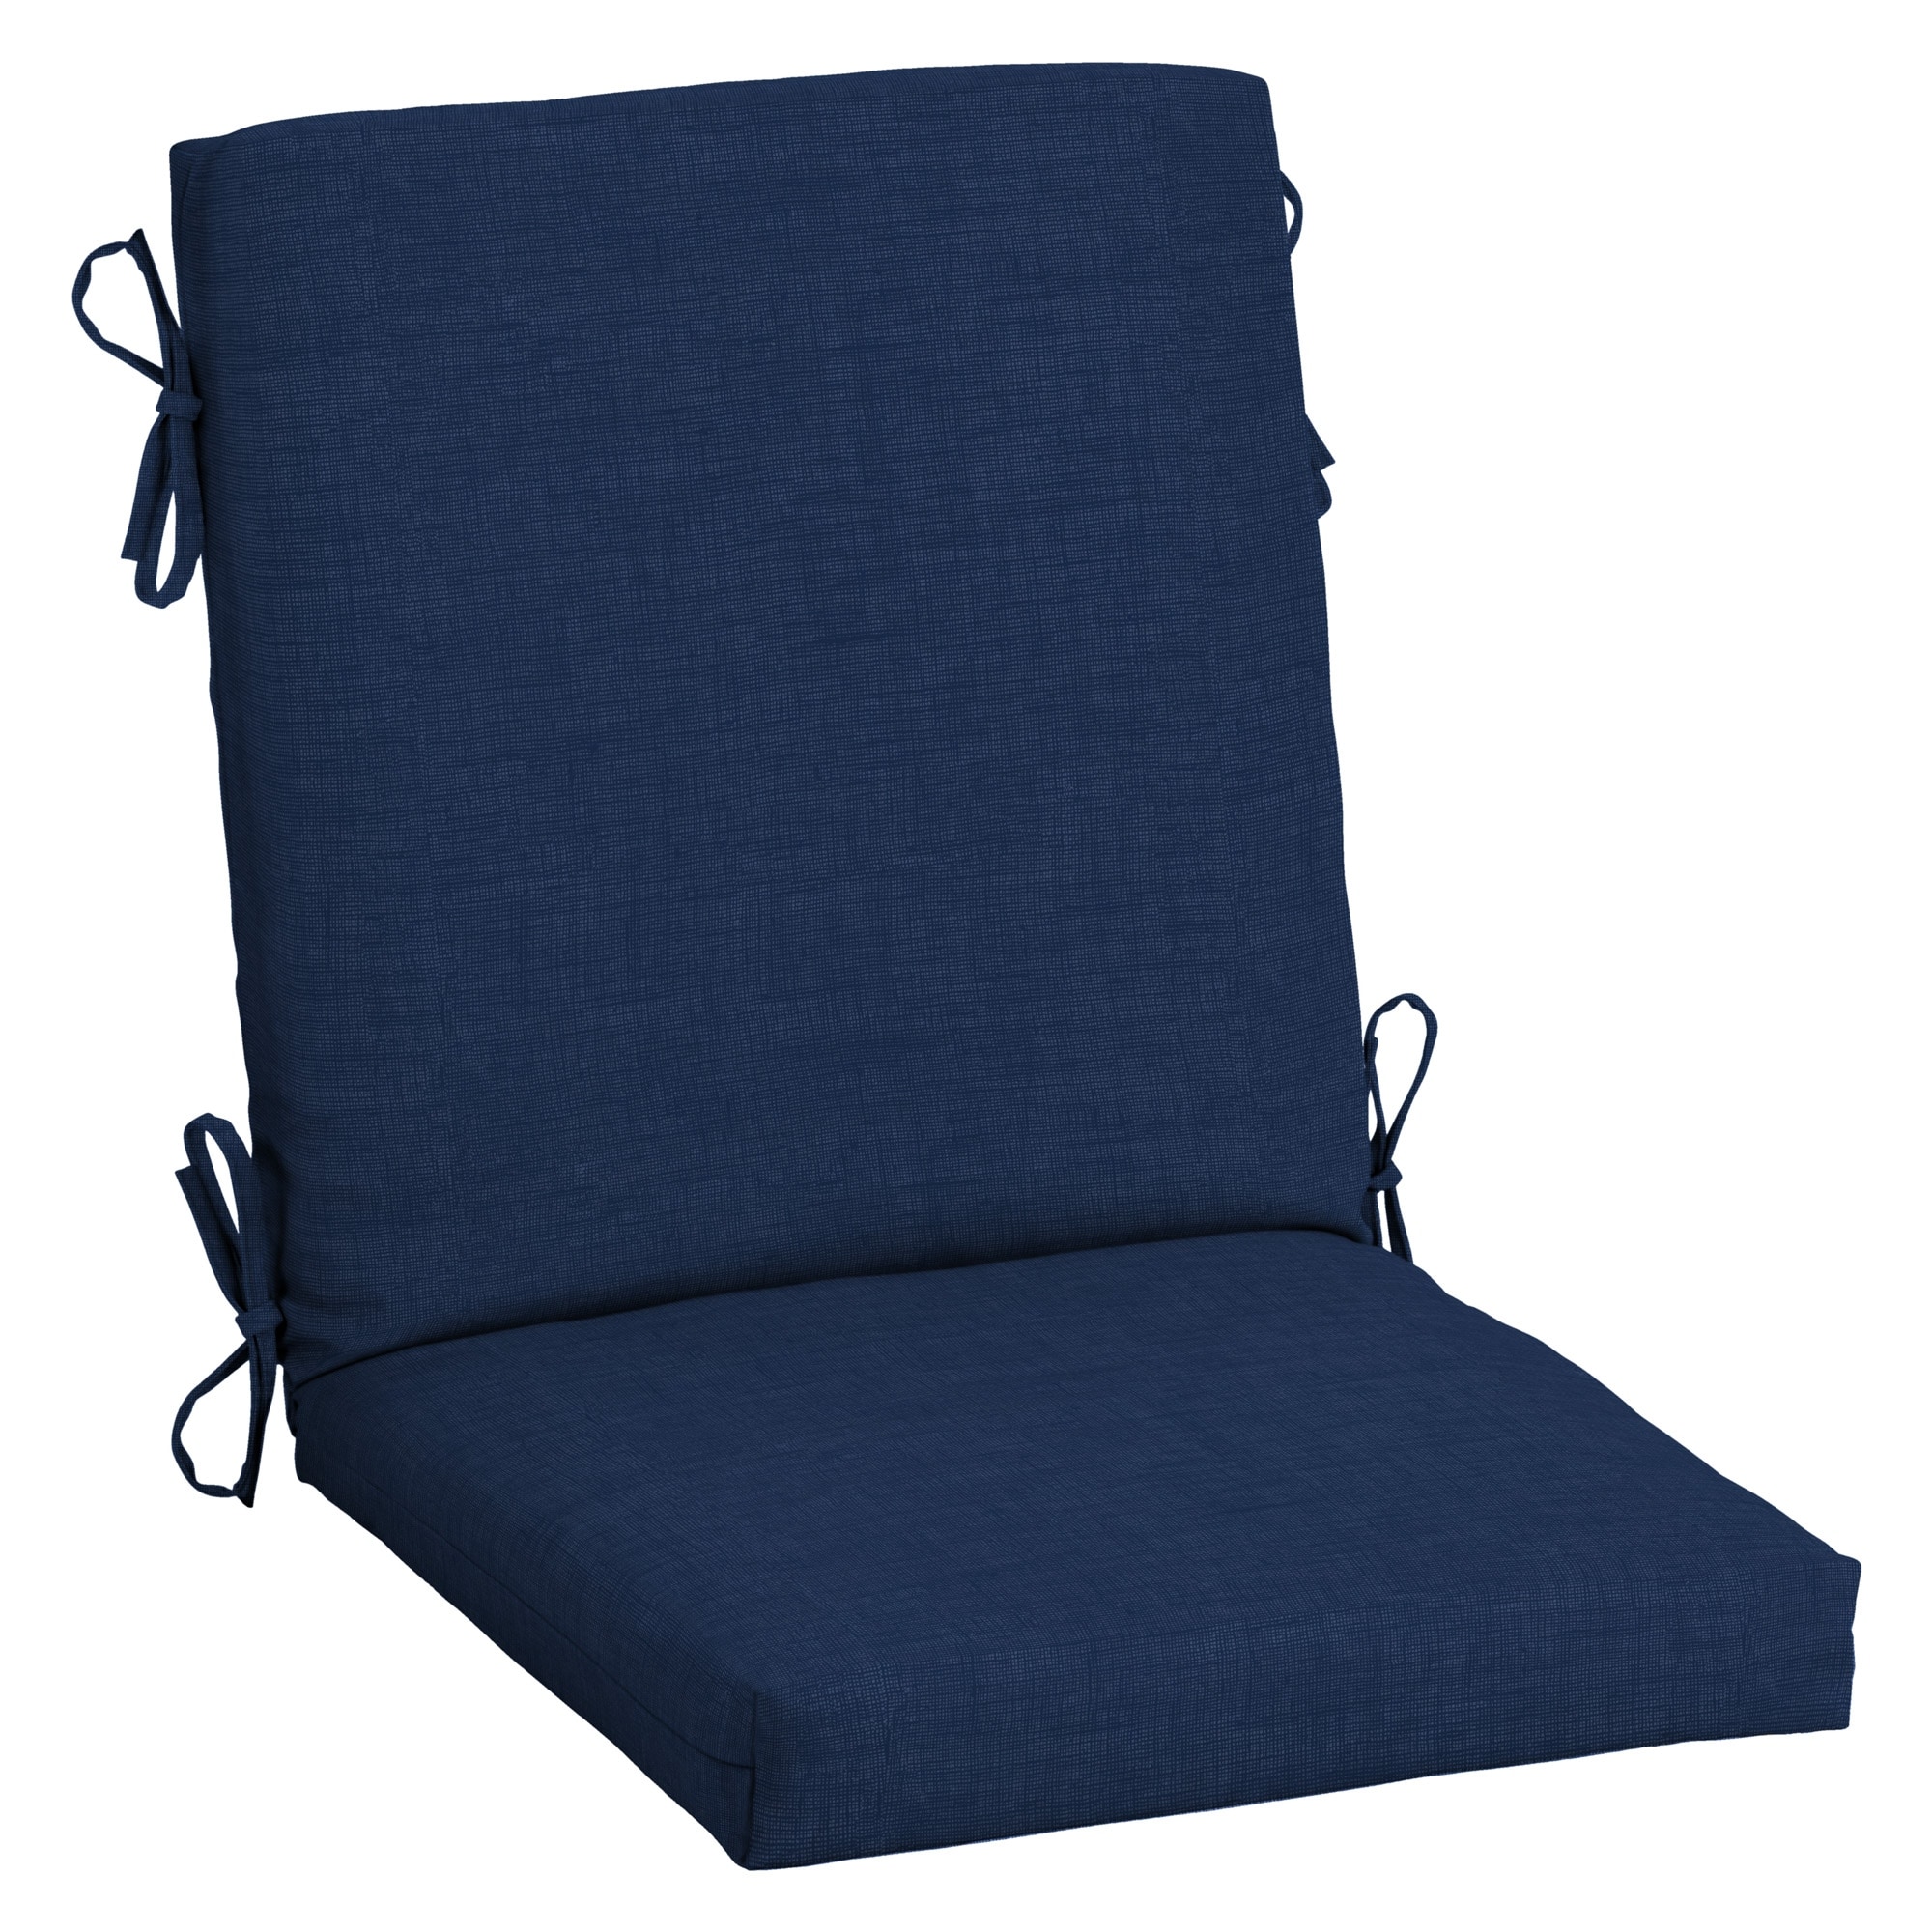 Arden Selections Outdoor Adirondack Chair Cushion Seat Pad Polyester 20 X 45.5